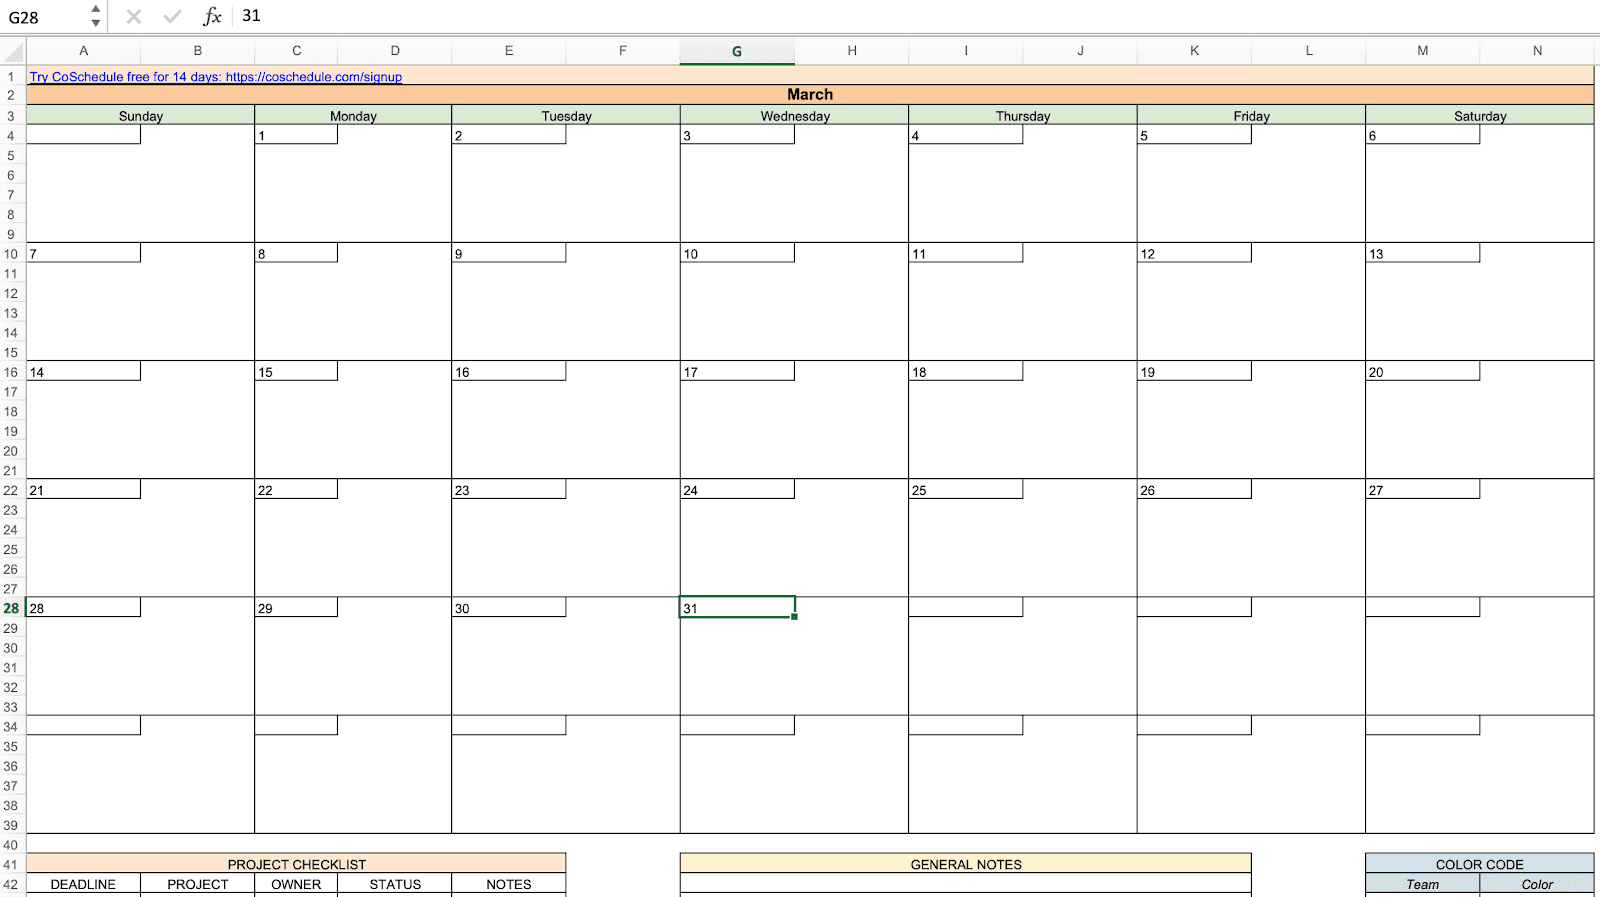 Editorial calendar to manage marcomm